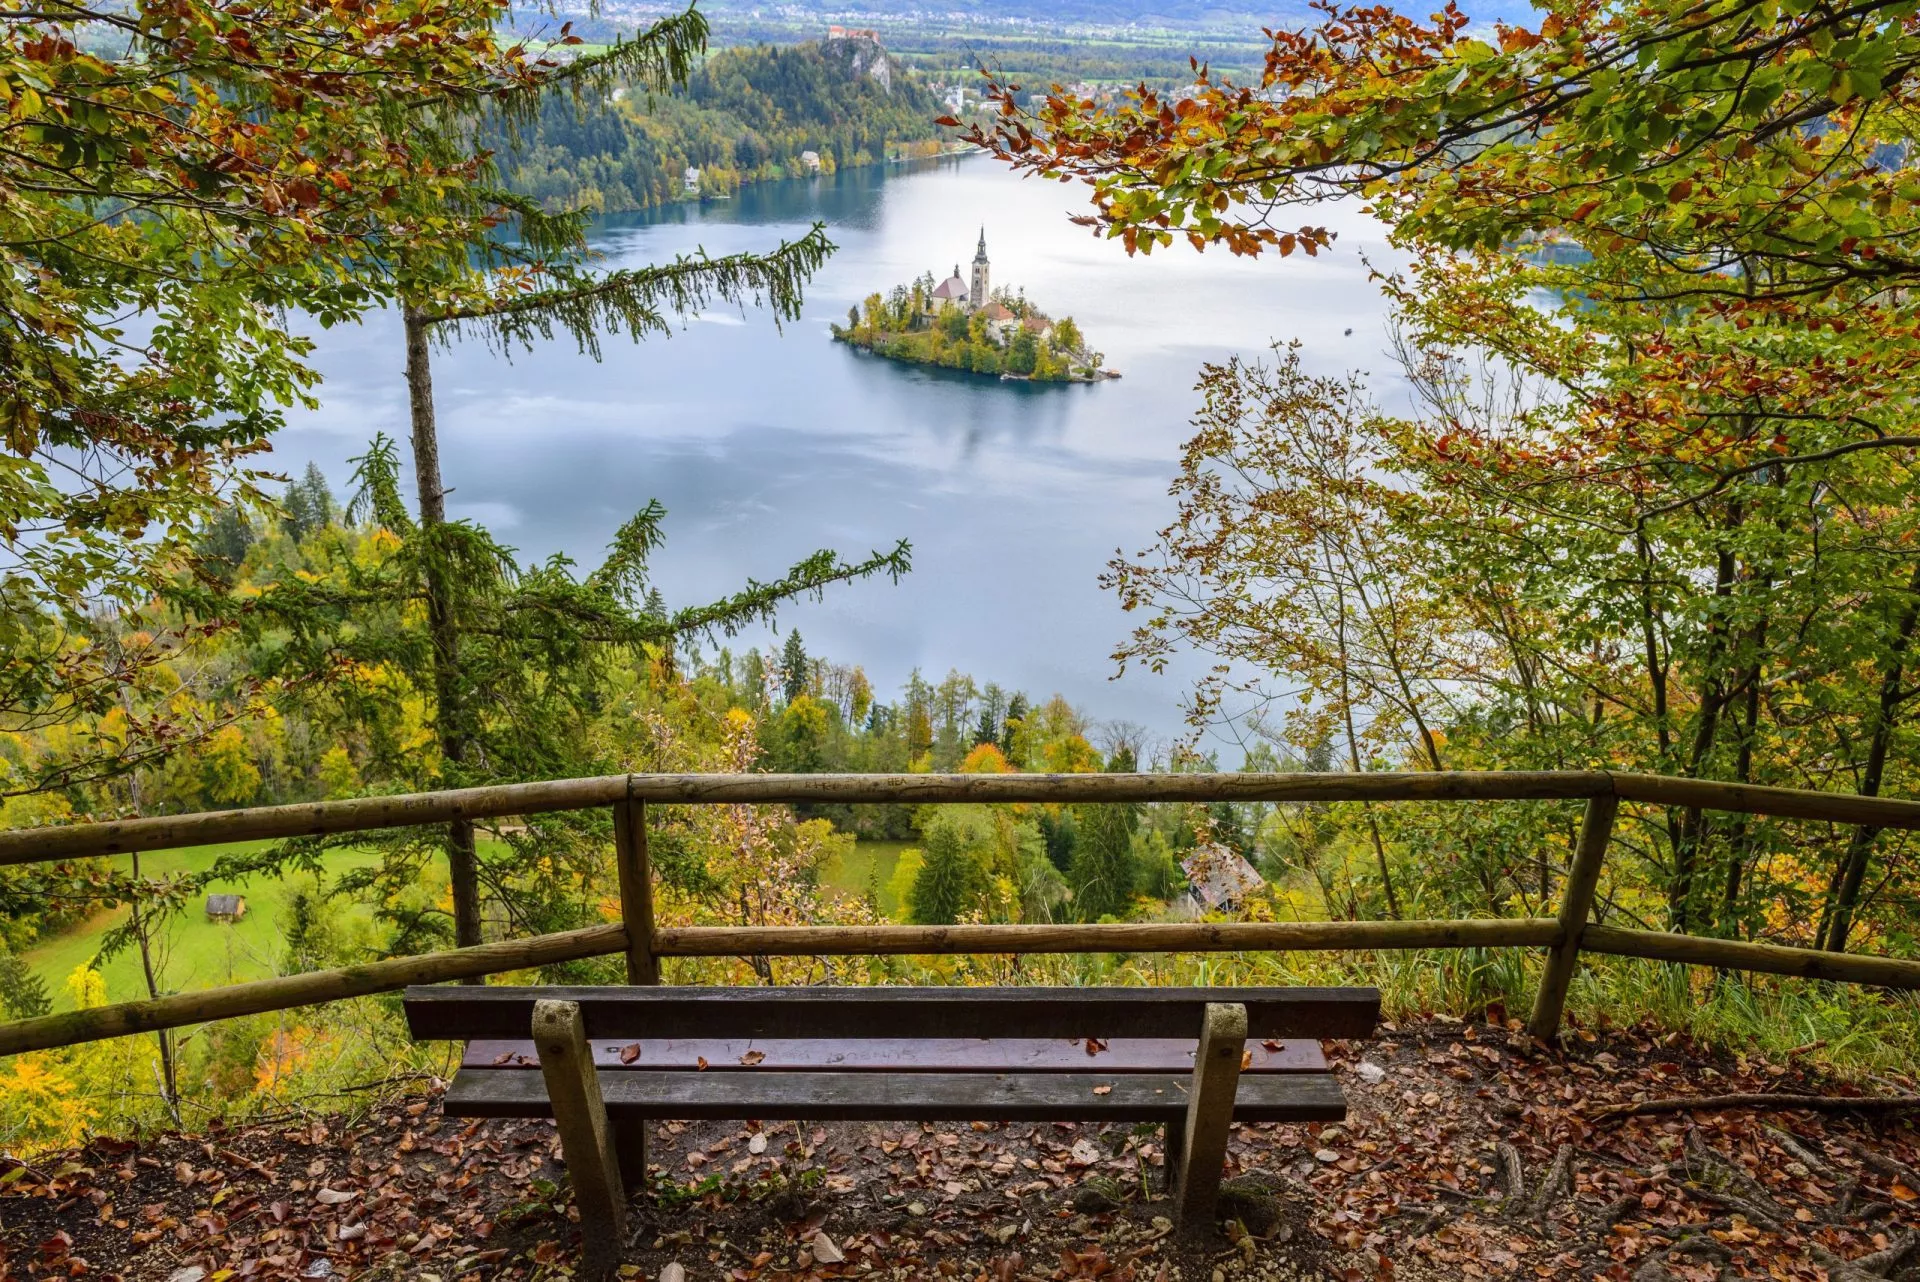 Views from hills above Bled